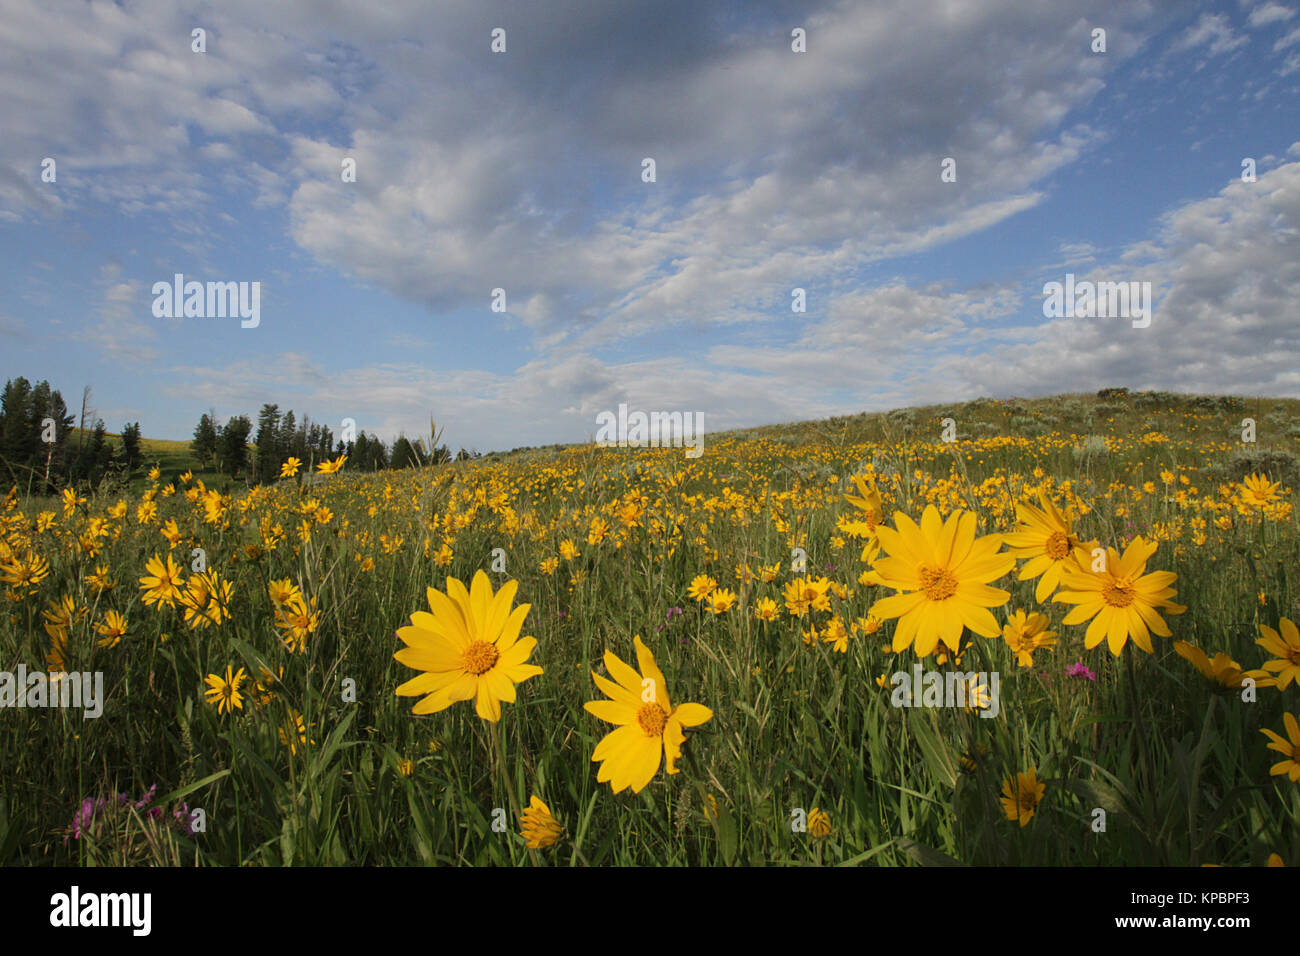 Wild oneflower helianthella flowers bloom in a field at the Blacktail Plateau in the Yellowstone National Park June 30, 2015 in Wyoming.  (photo by Jim Peaco via Planetpix) Stock Photo